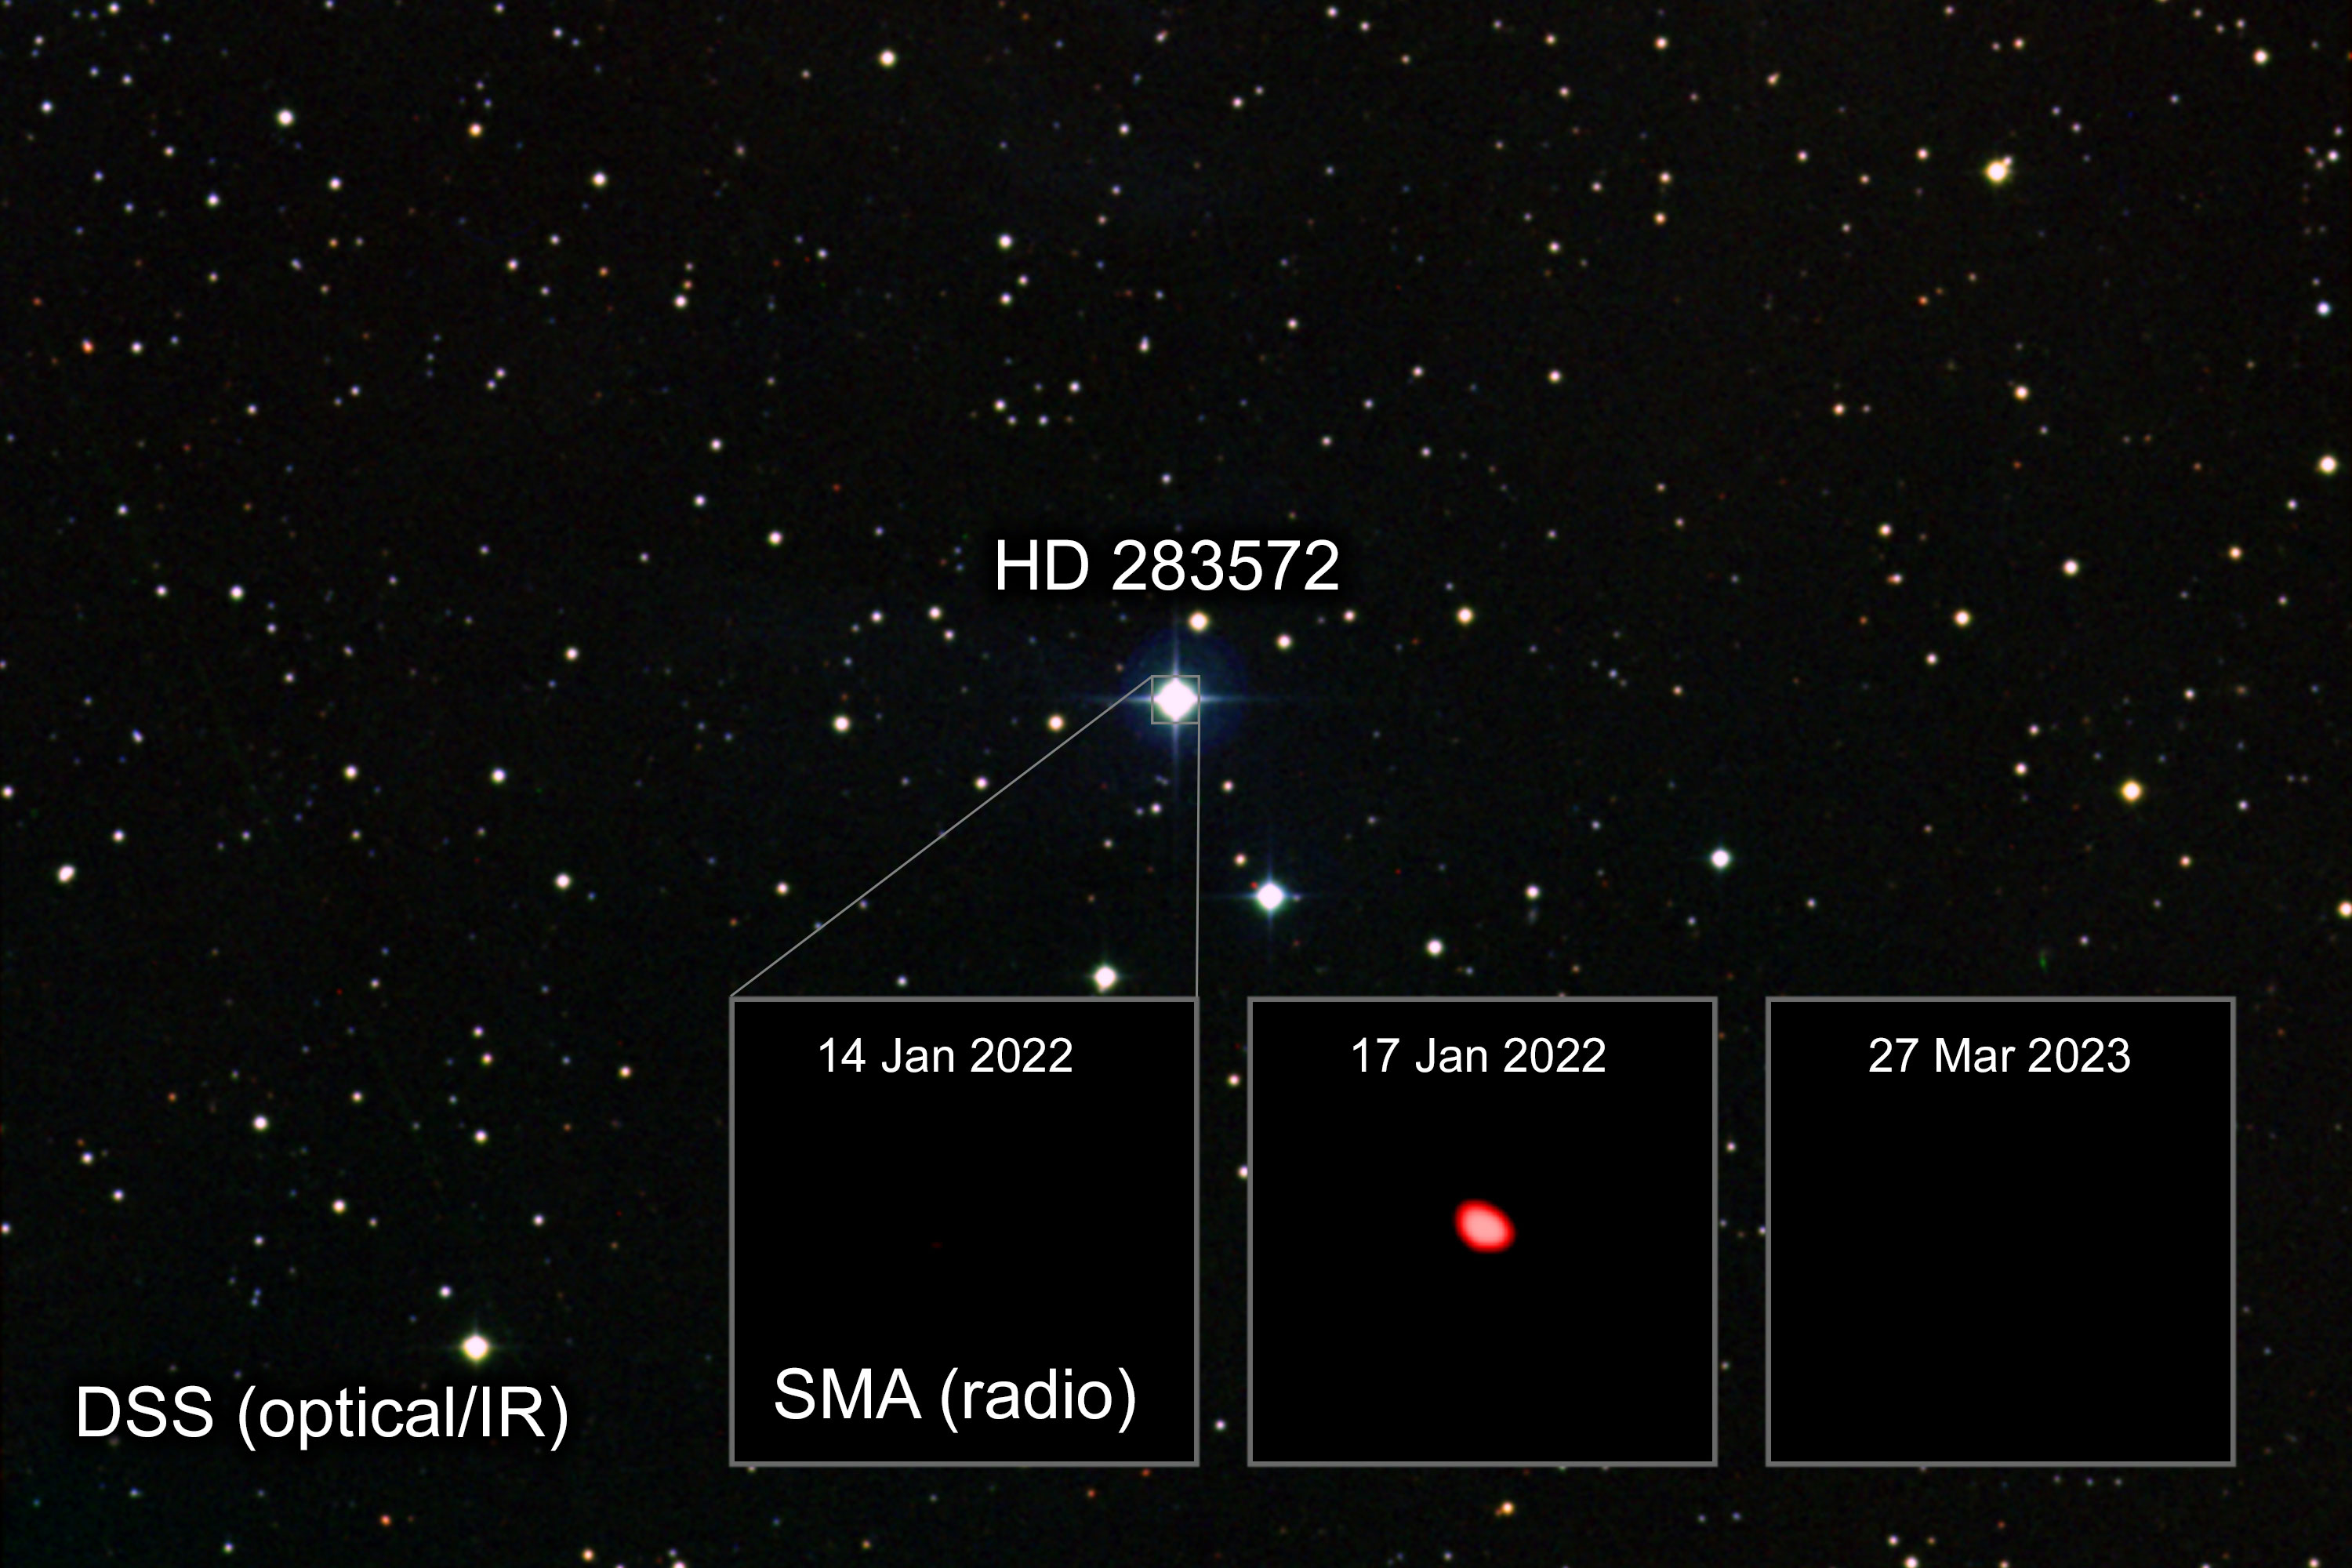 The location of the erupting young star HD 283572